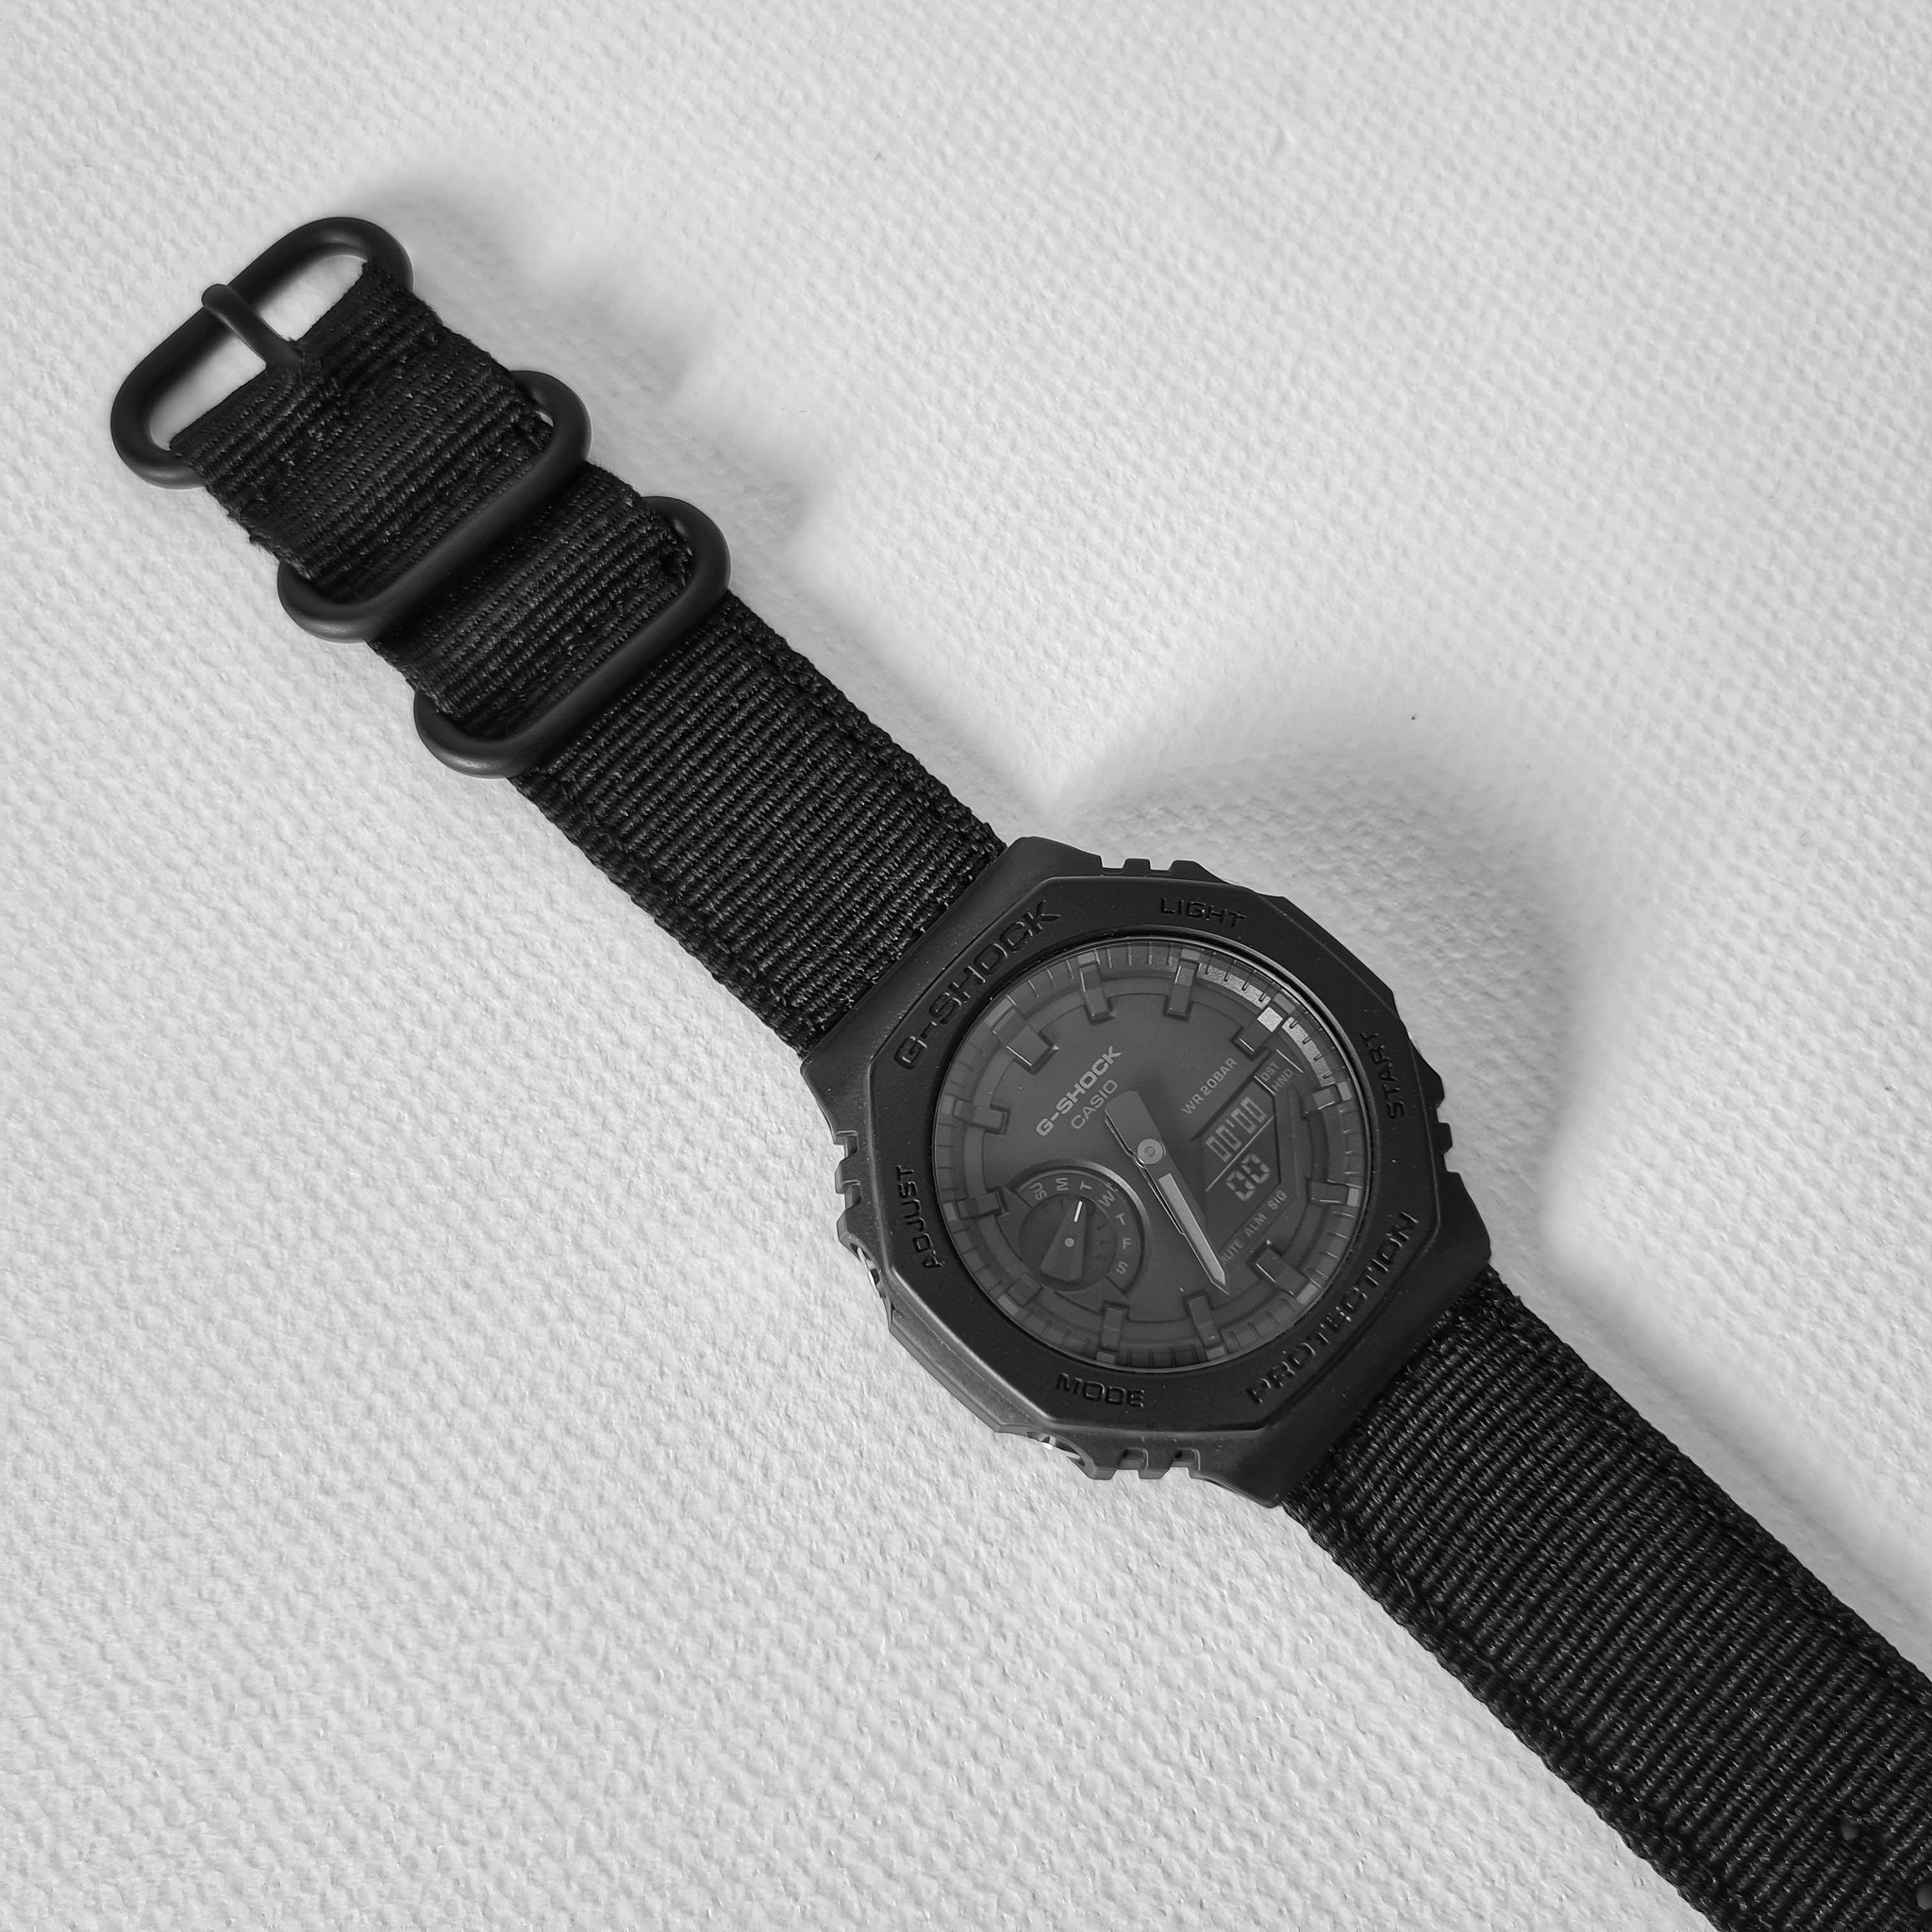 Boxfox1 on Twitter: "Casio G-Shock GA-2100 on nato strap, I be posting the technical problems of making this little mods to the straps. Stay tunned! # Casio #GShock #GA2100 #reloj #